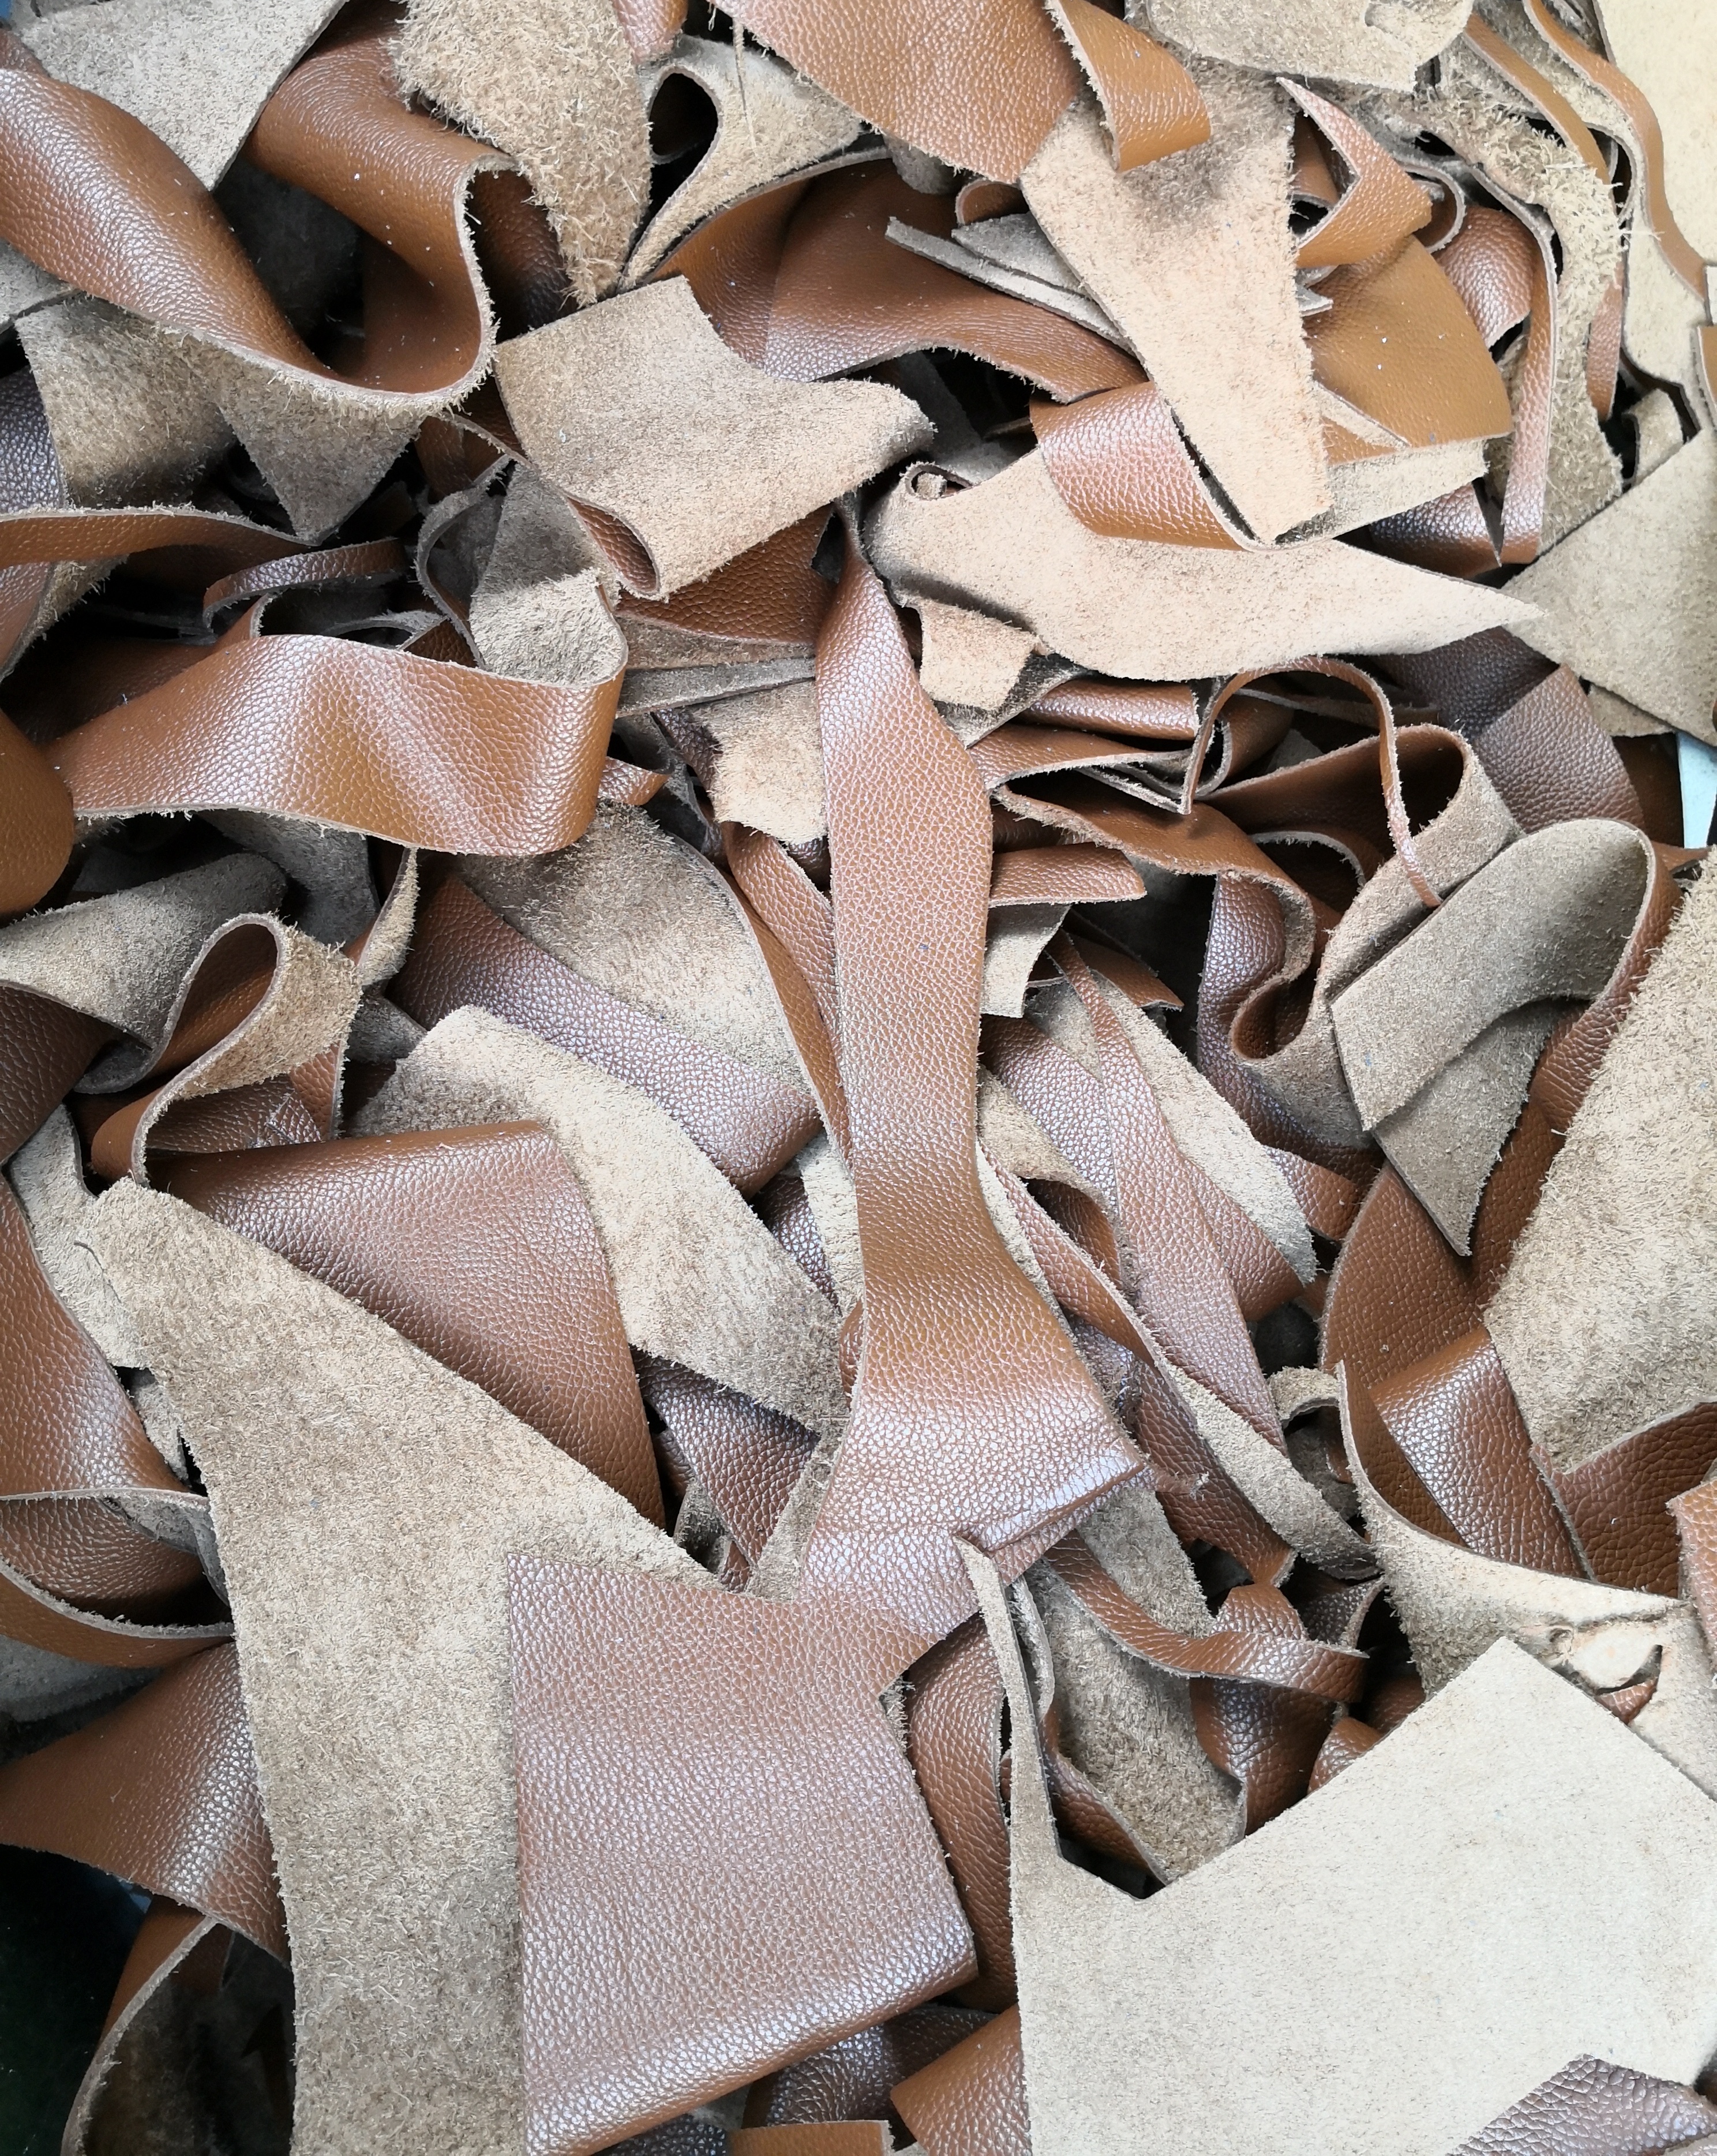 scraps of leather for sale